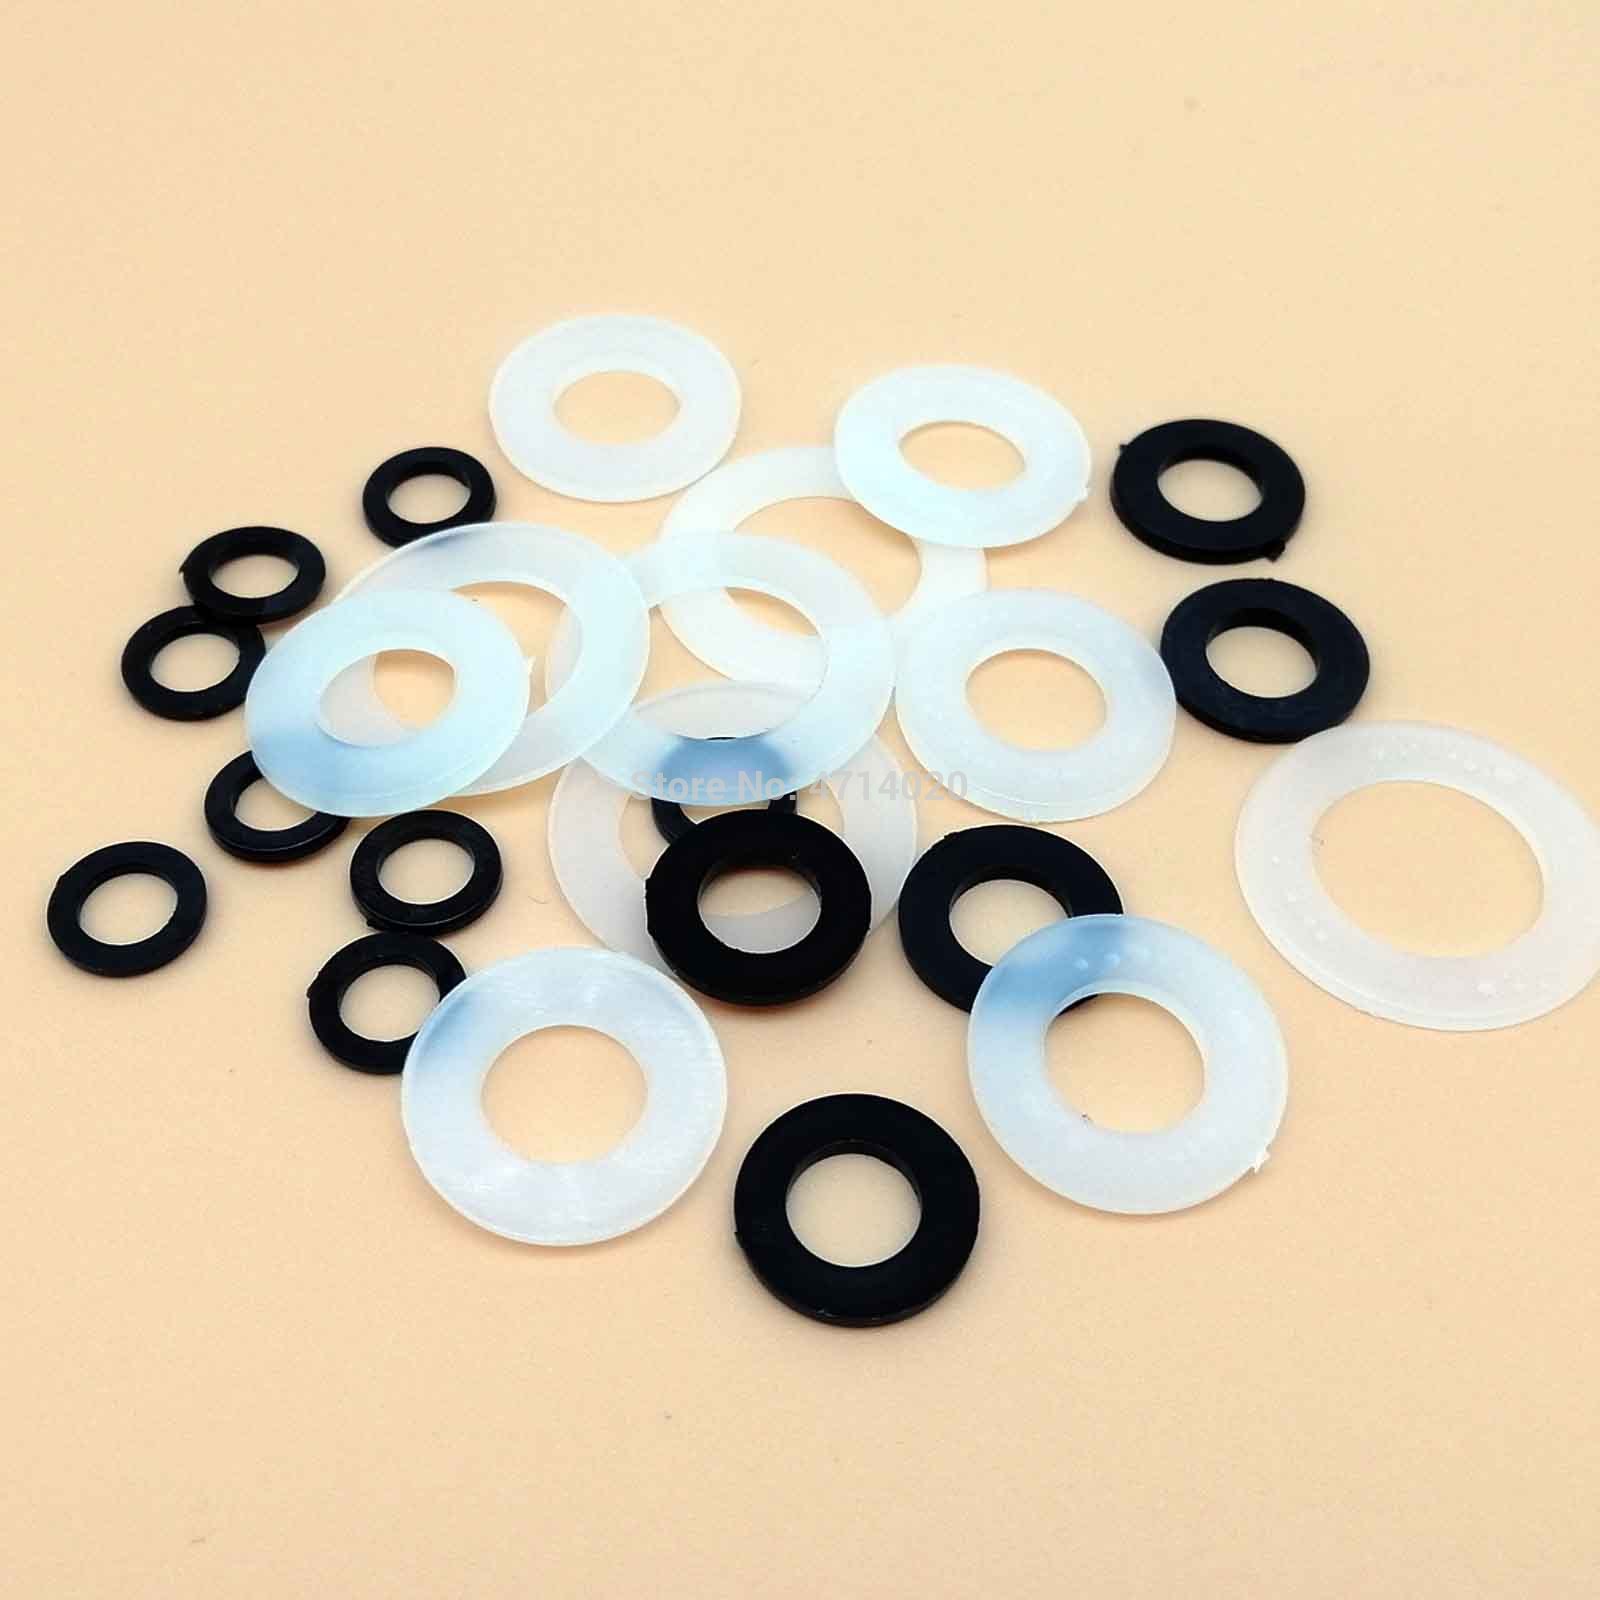 100pcs M1.5 M2 M2.5 M3 M4 M5 M6 M8 M10 M12 White Black Plastic Nylon Flat Washer Plane Spacer Insulation Gasket Ring For Screw